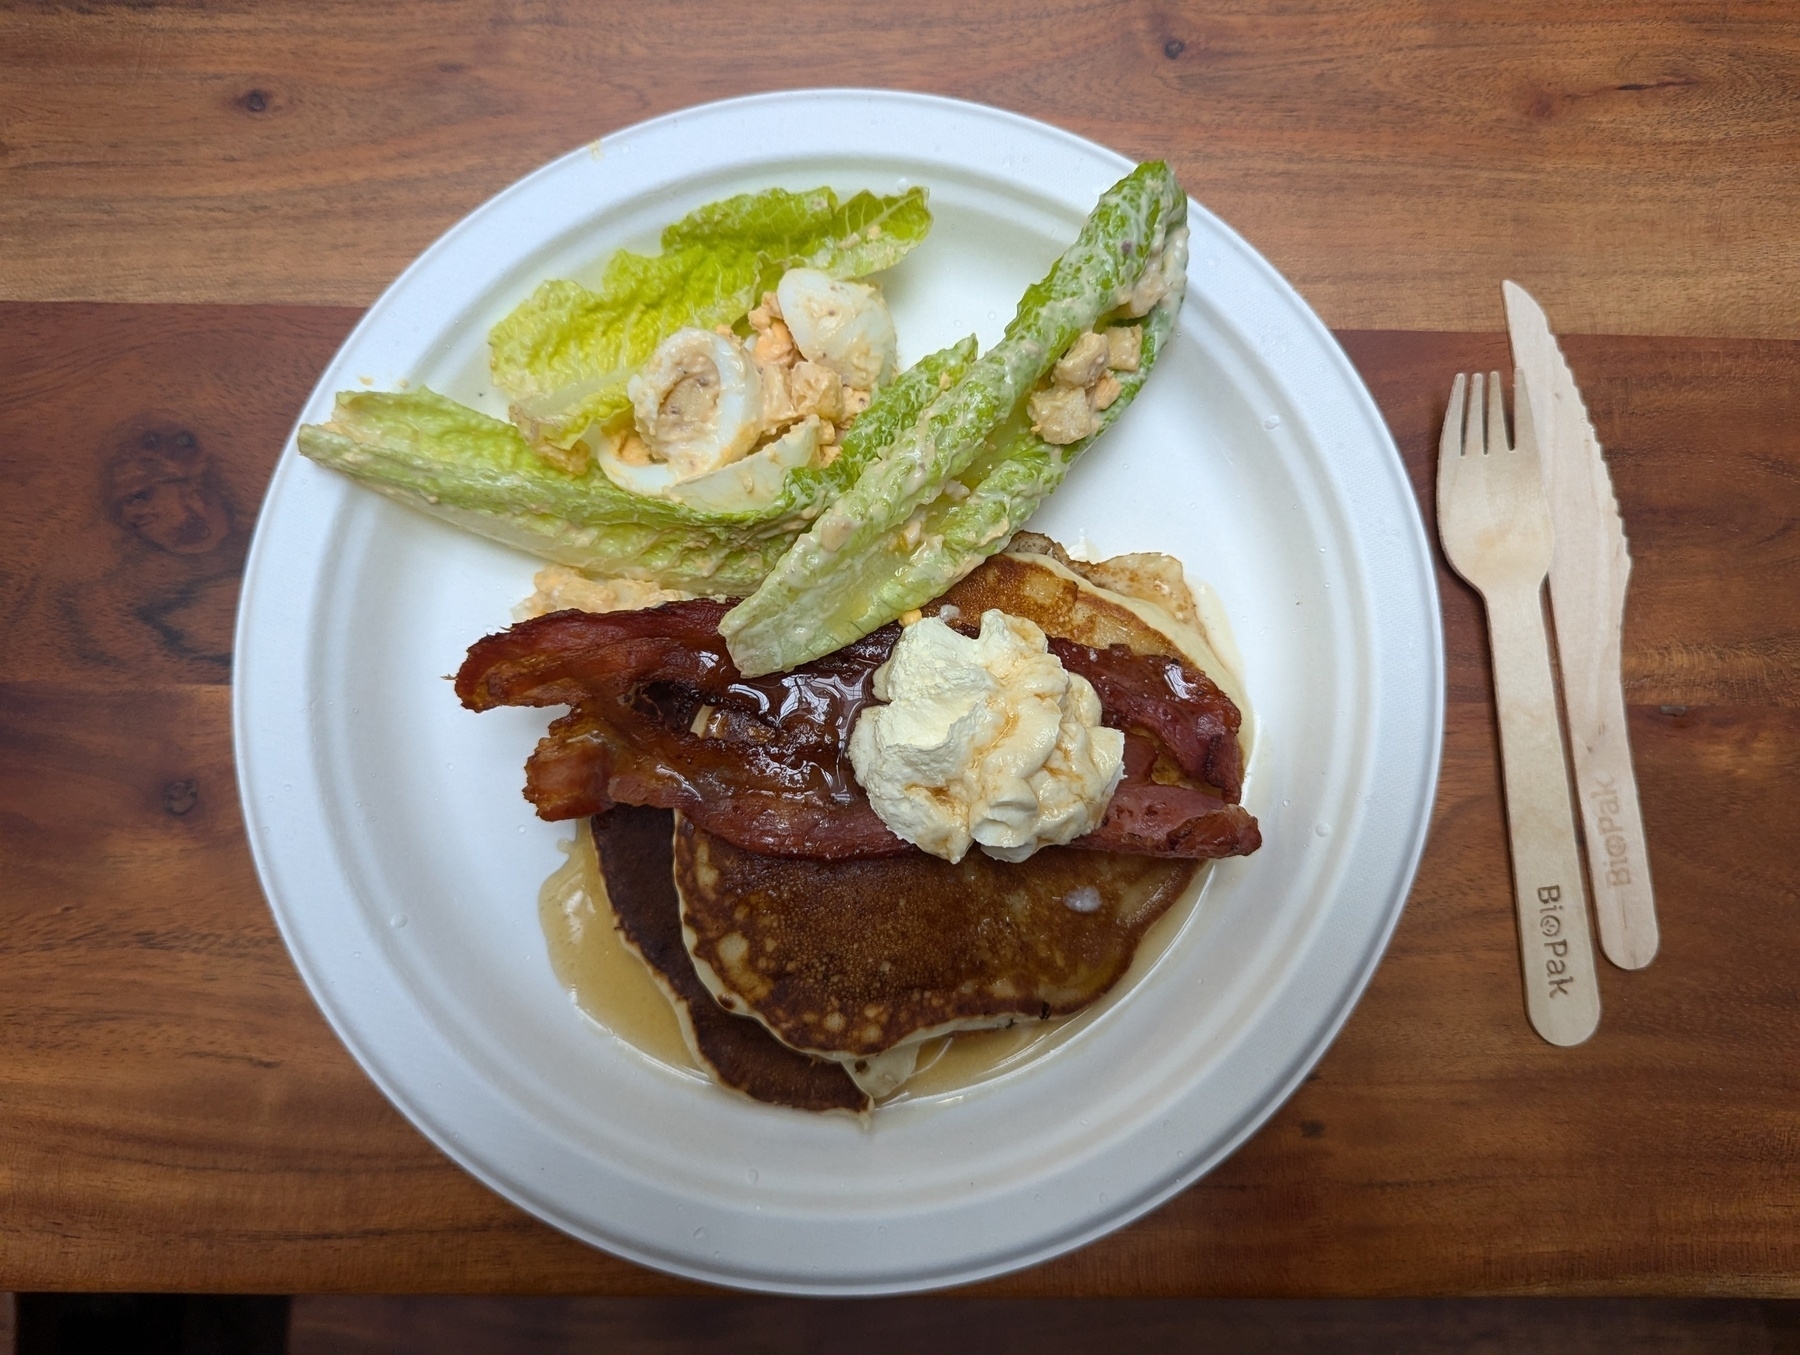 A plate with pancakes, bacon, whipped cream, drissled with maple syrup, with a side of Ceaser salad and egg. Wooden knife and fork on the right.